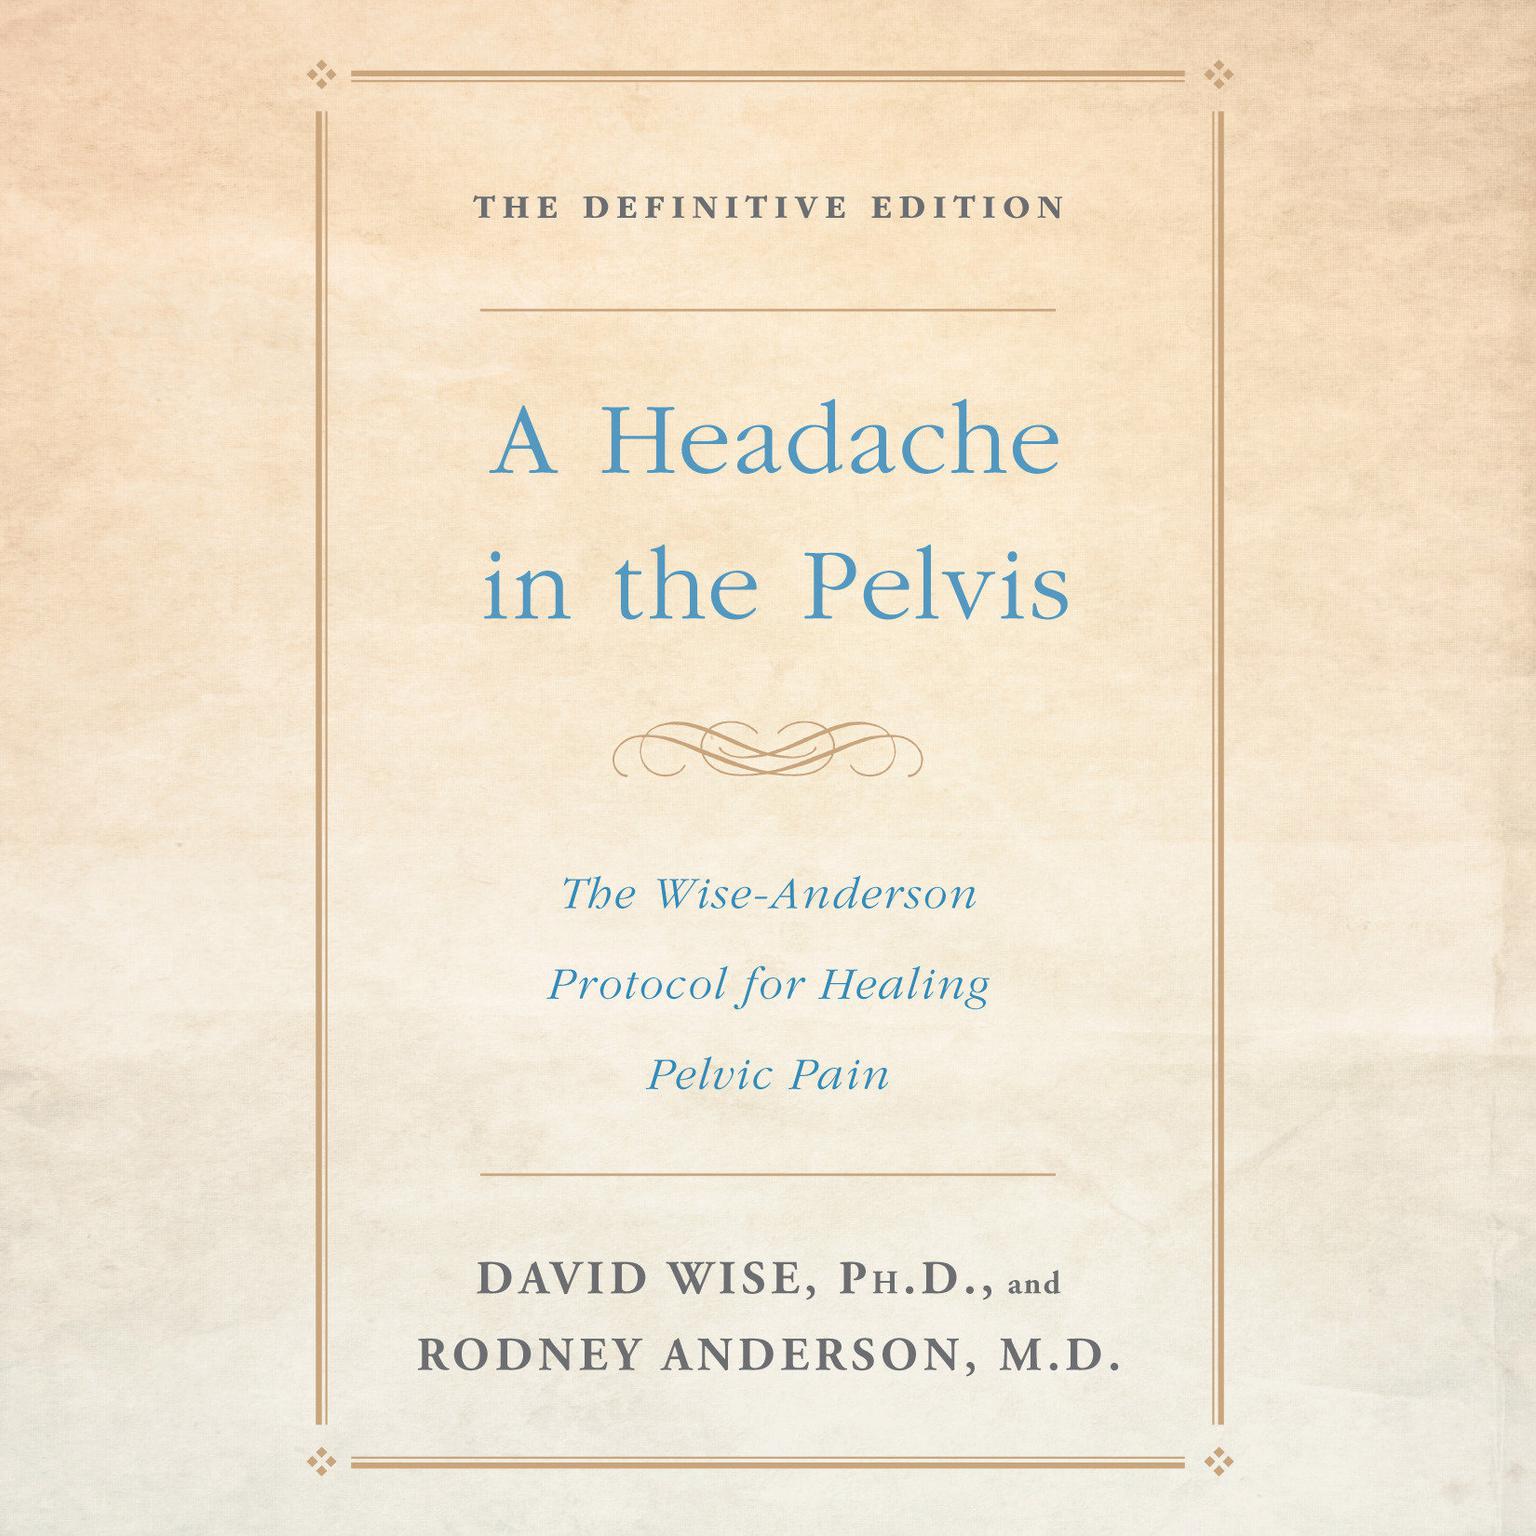 A Headache in the Pelvis (Abridged): The Wise-Anderson Protocol for Healing Pelvic Pain: The Definitive Edition Audiobook, by Rodney Anderson